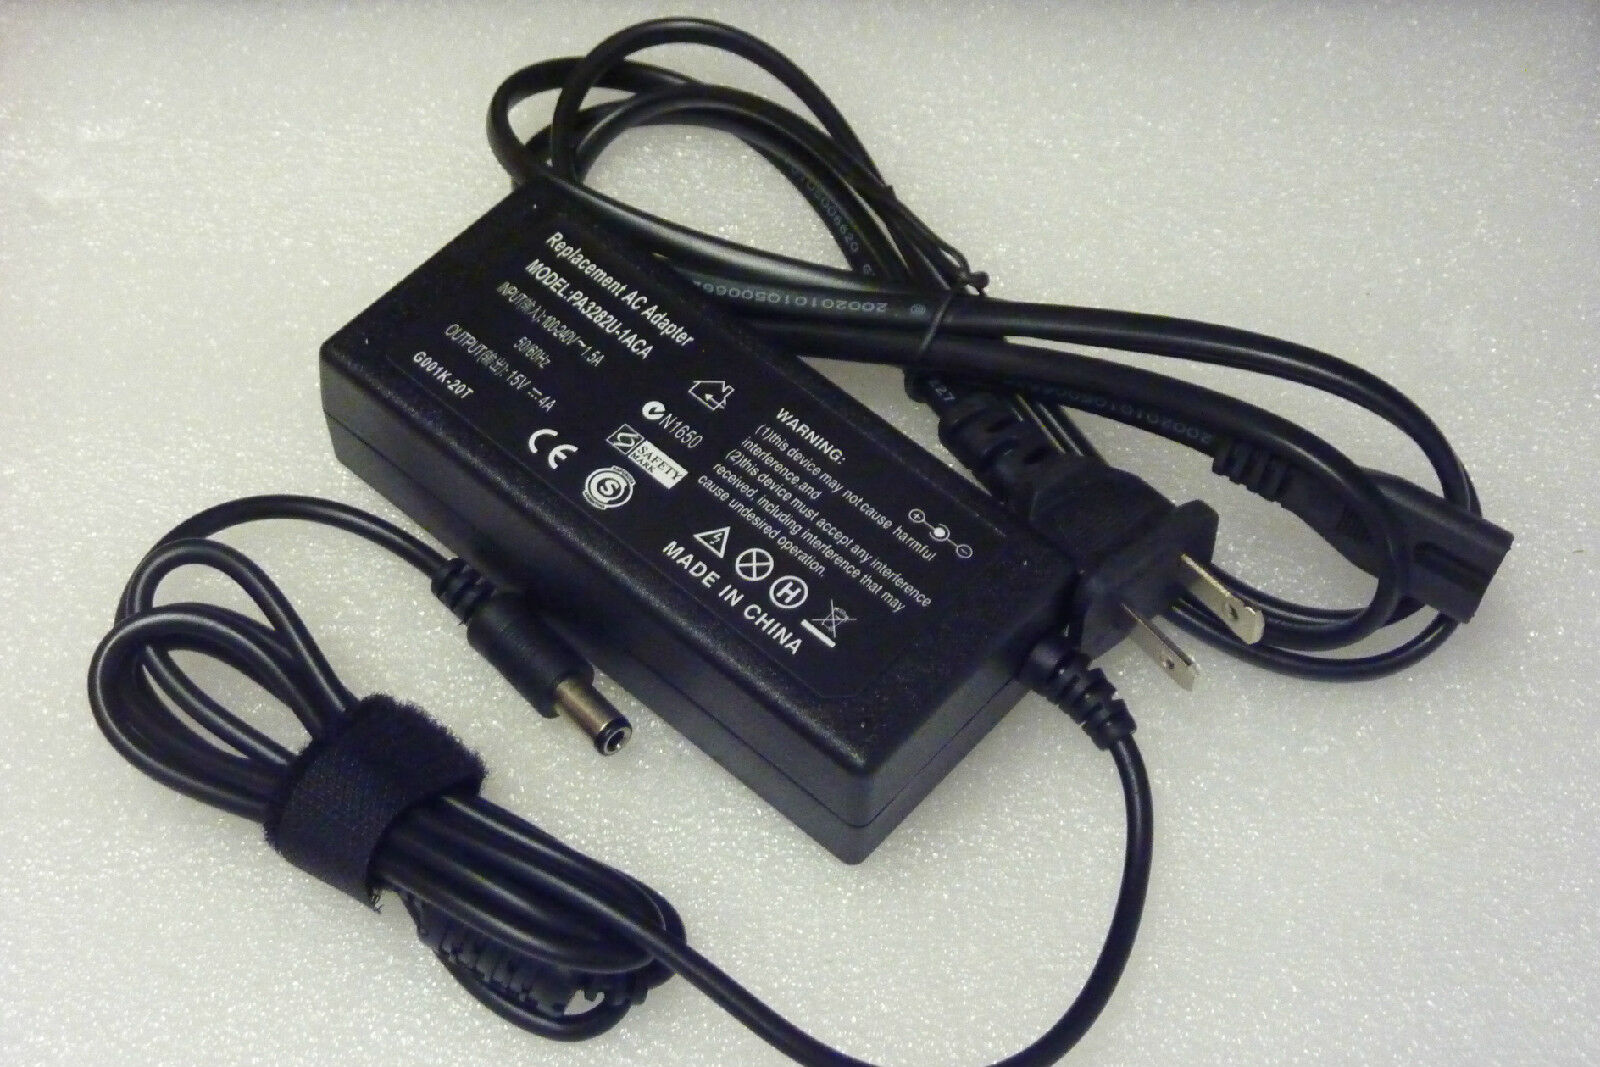 AC Adapter Power Cord Battery Charger For Toshiba Tecra 520CDT 530CDT 550CDT 